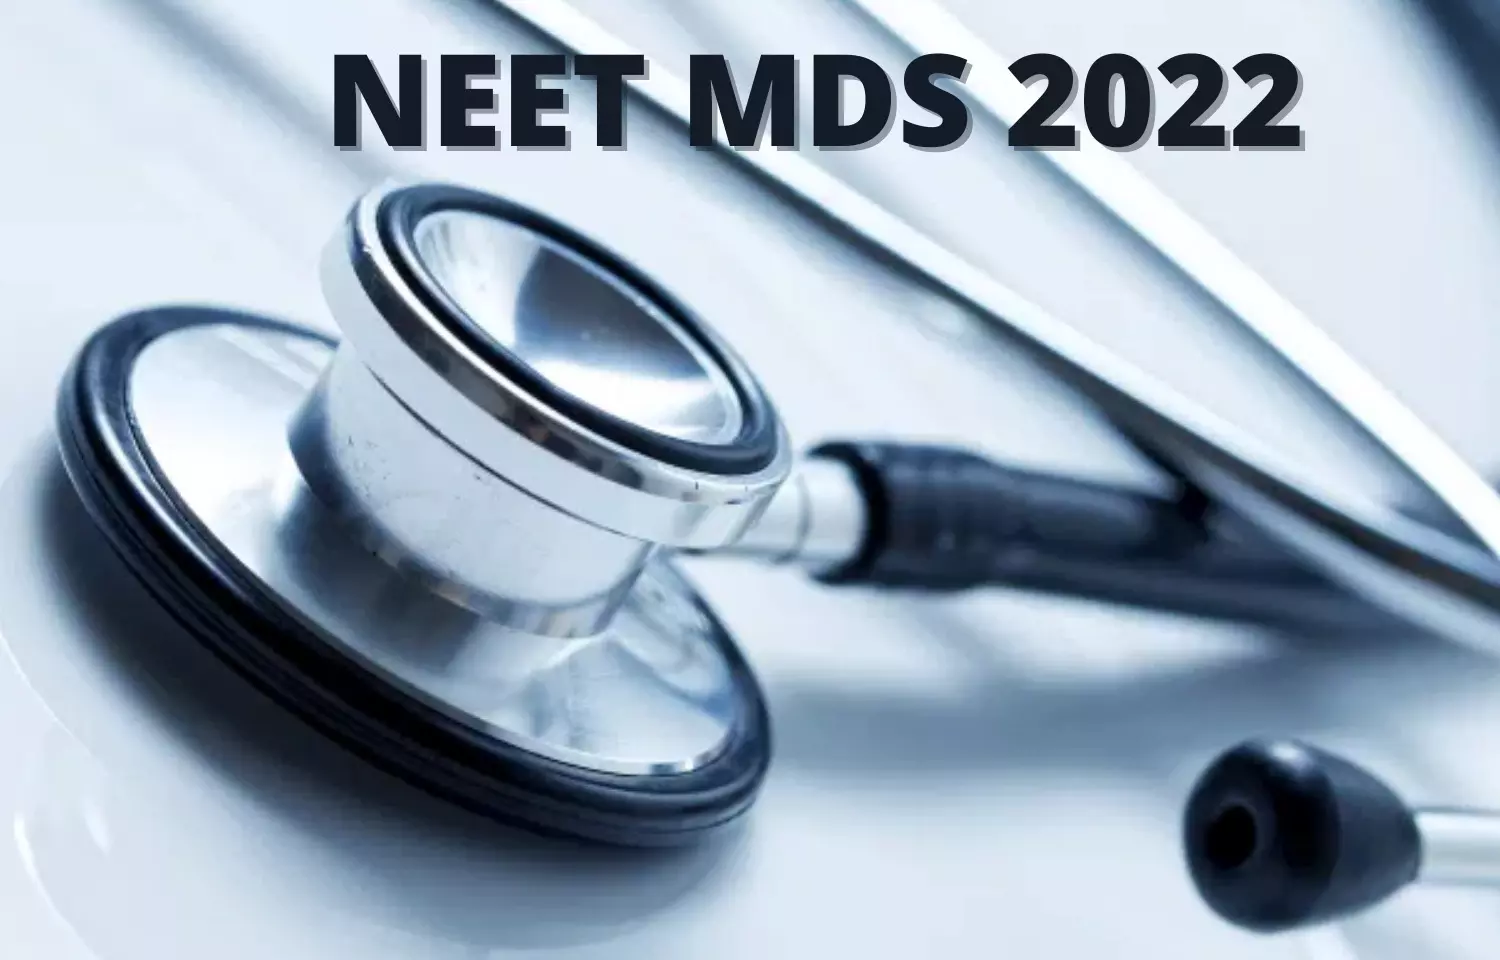 NEET MDS 2022: Check out schedule, eligibility criteria, application procedure, exam schedule, all details here